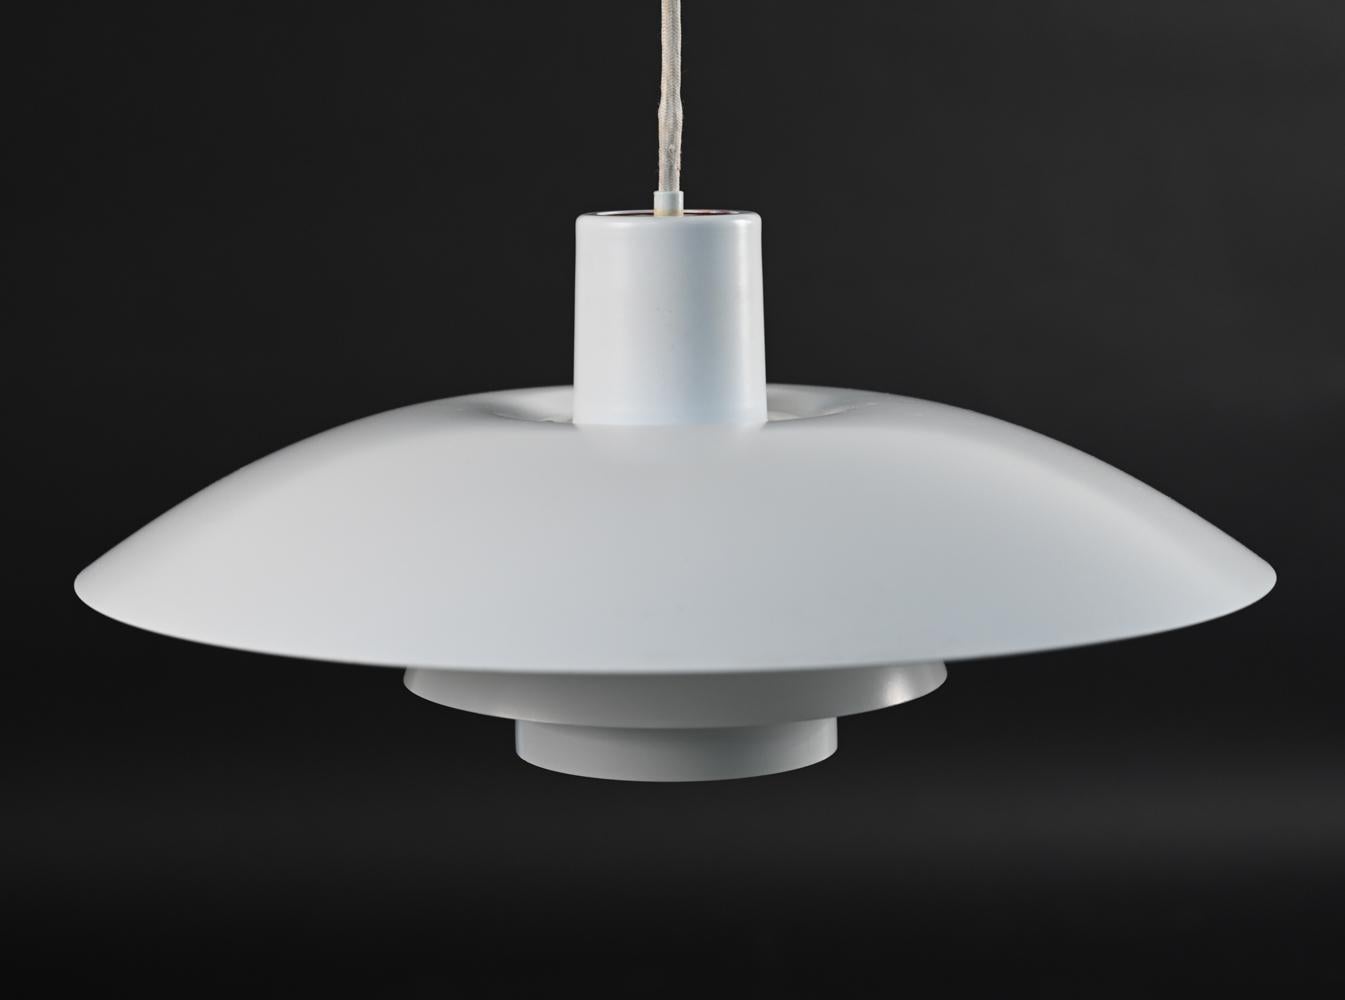 This pendant light was designed was Poul Henningsen for Louis Poulsen as part of Henningsen's groundbreaking three shade system that uses metal shades to direct uniform, downwards lighting. This model PH 4/3 pendant light has a clean, modern look